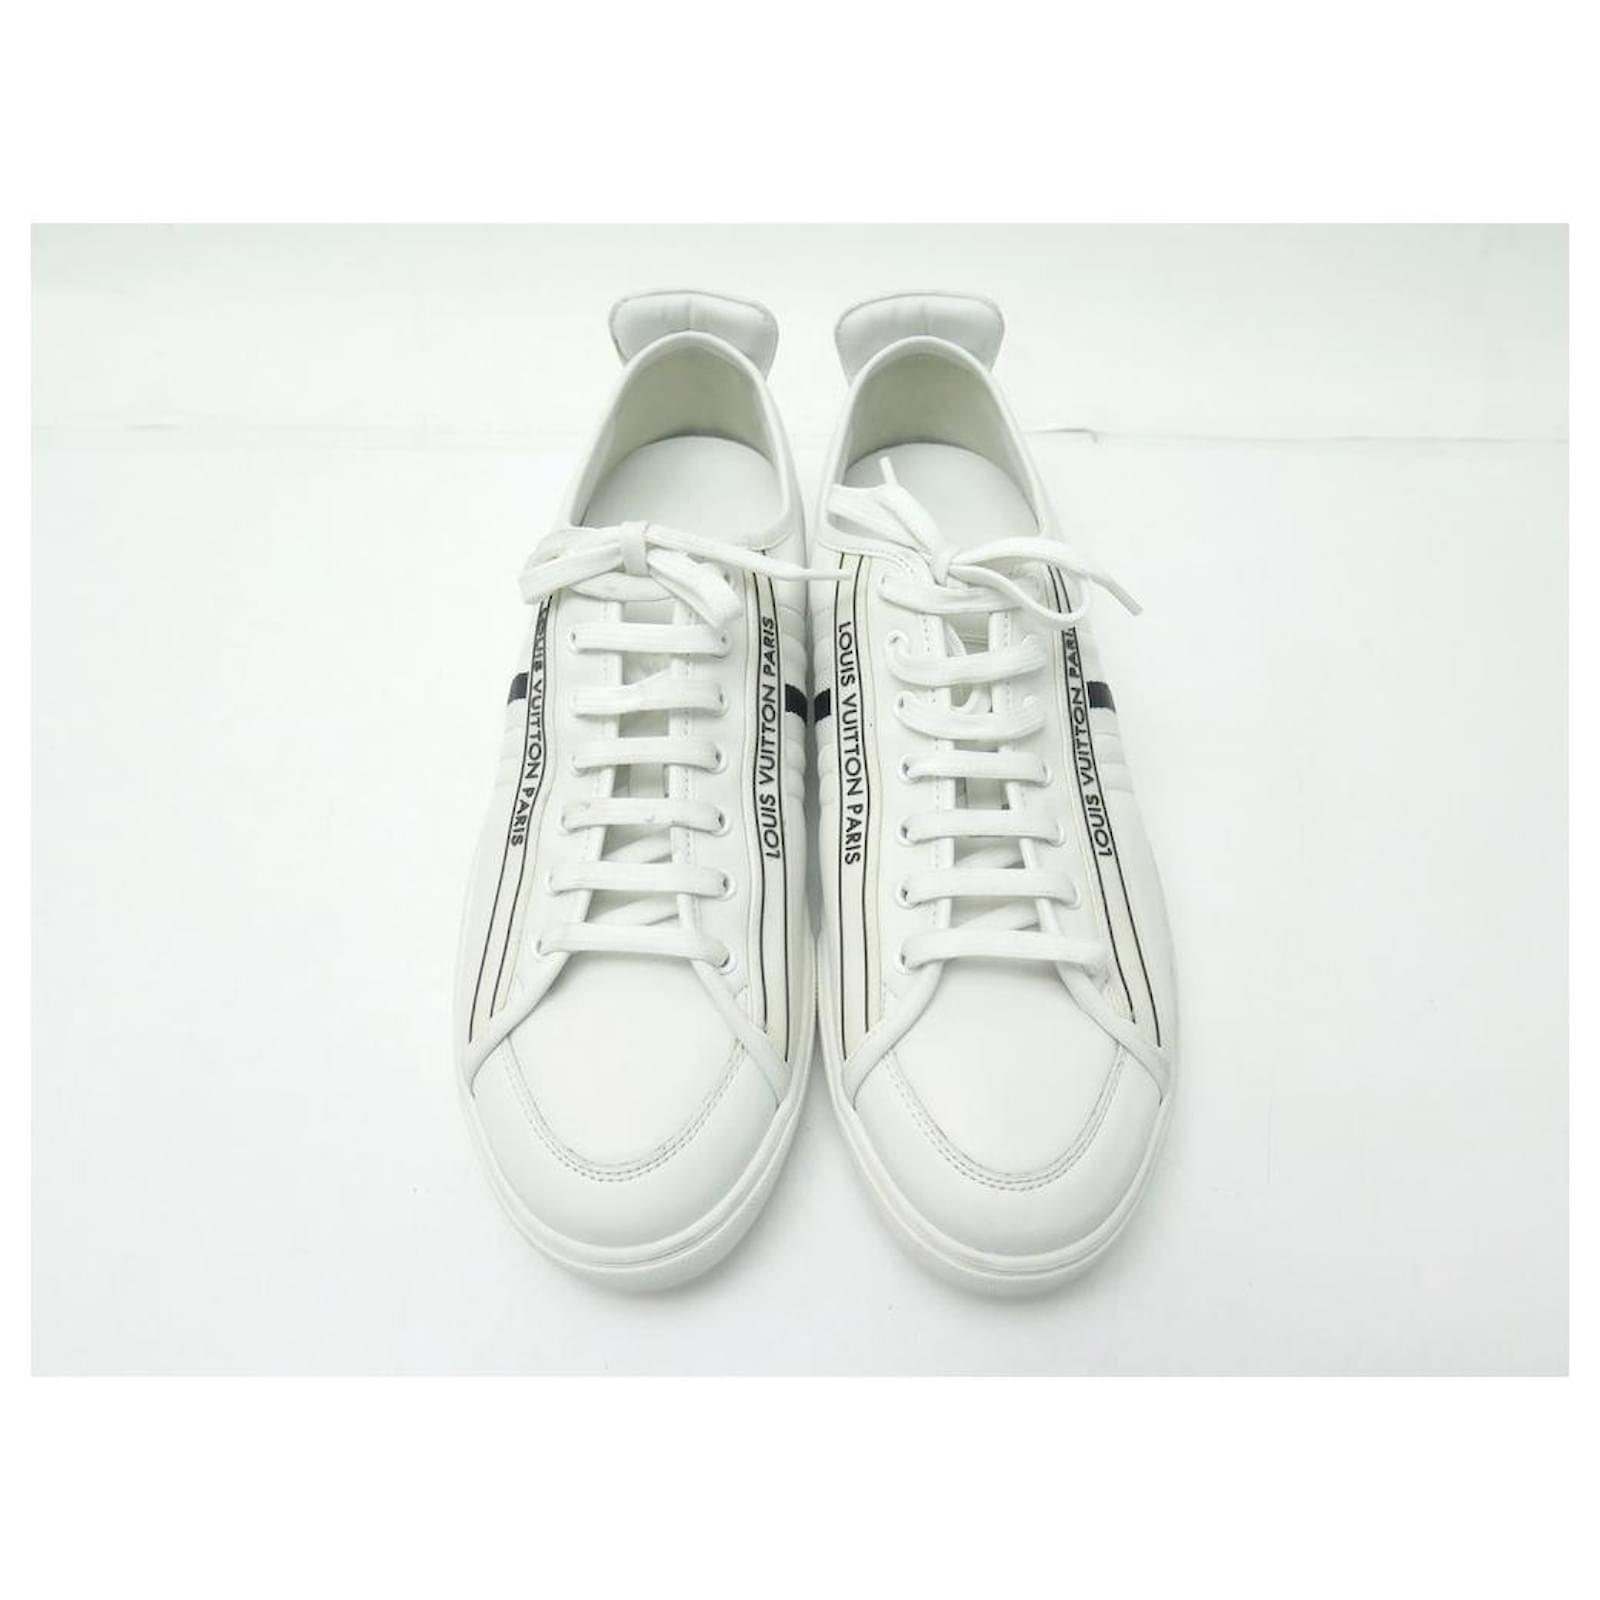 LOUIS VUITTON sneakers SHOES 9 43 IN WHITE LEATHER + BOX SNEAKERS